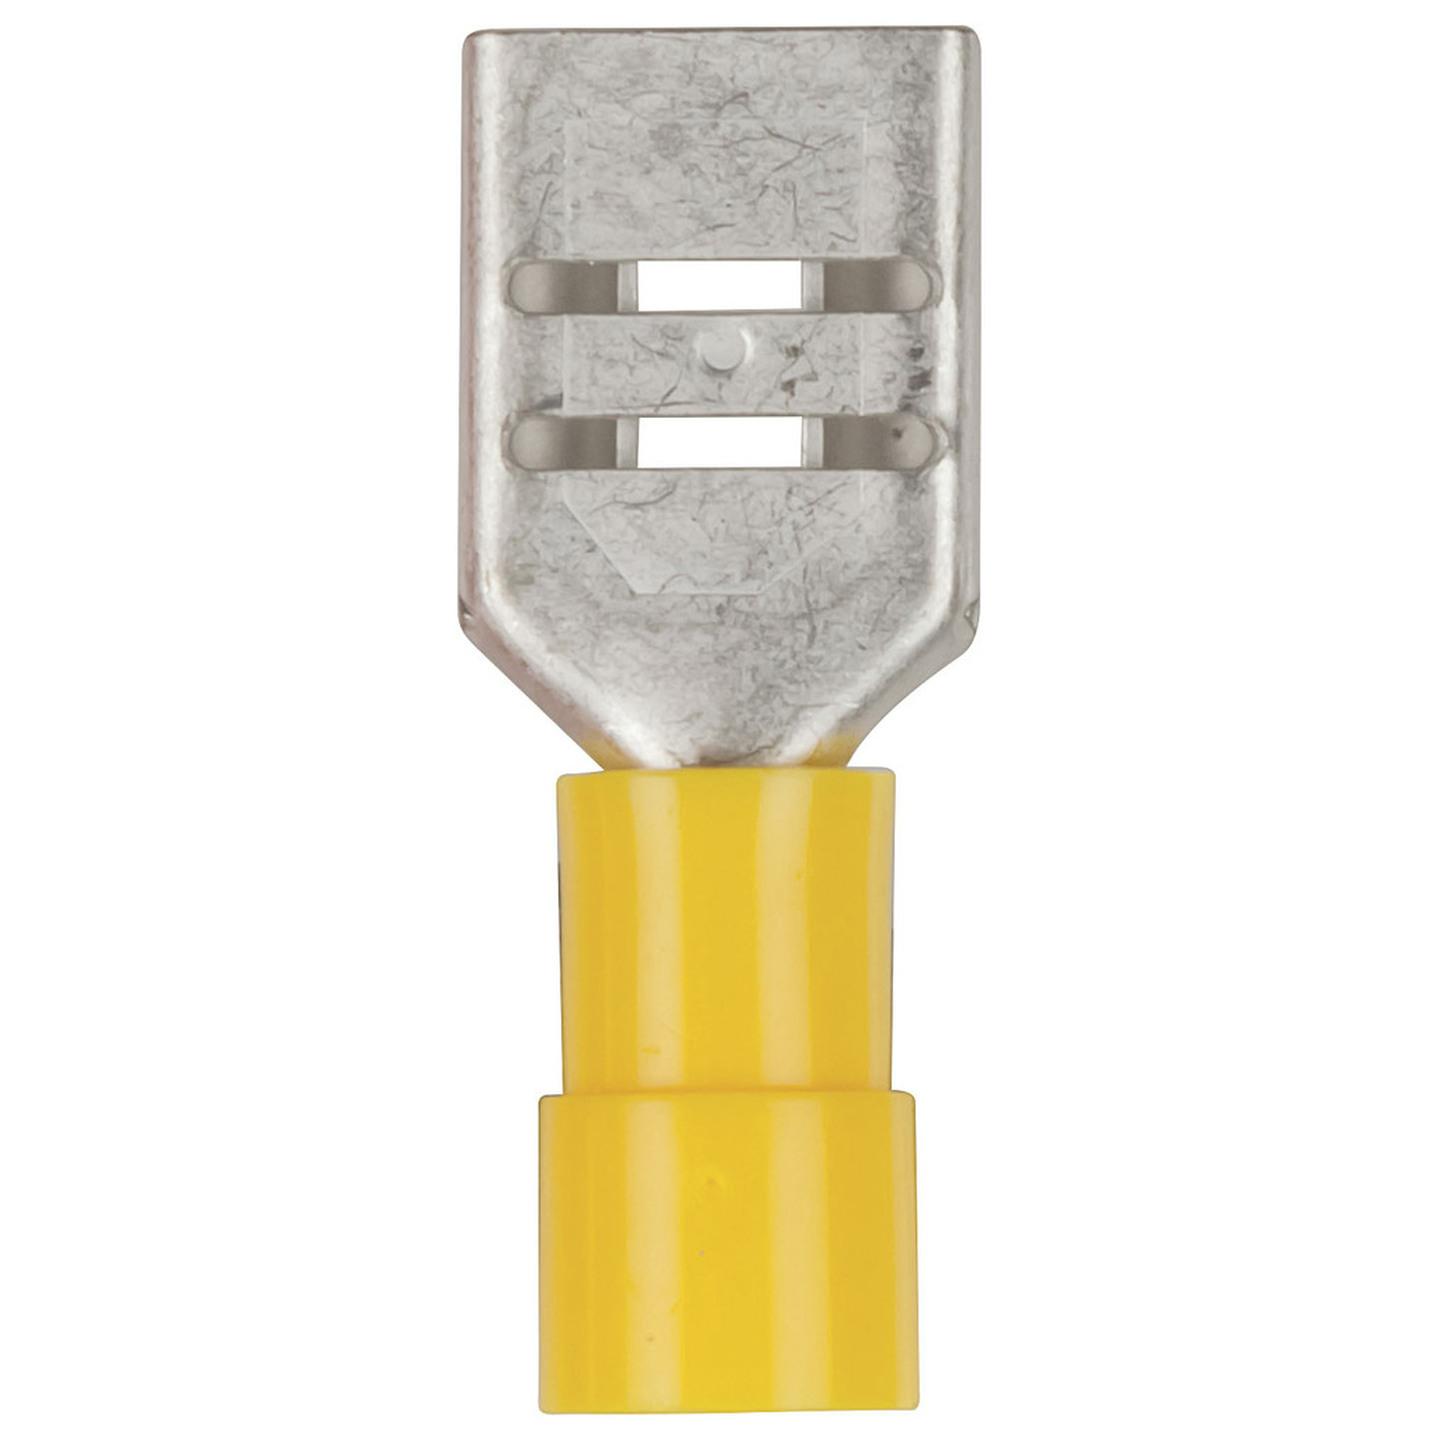 9.5mm Female Spade - Yellow - Pack of 4